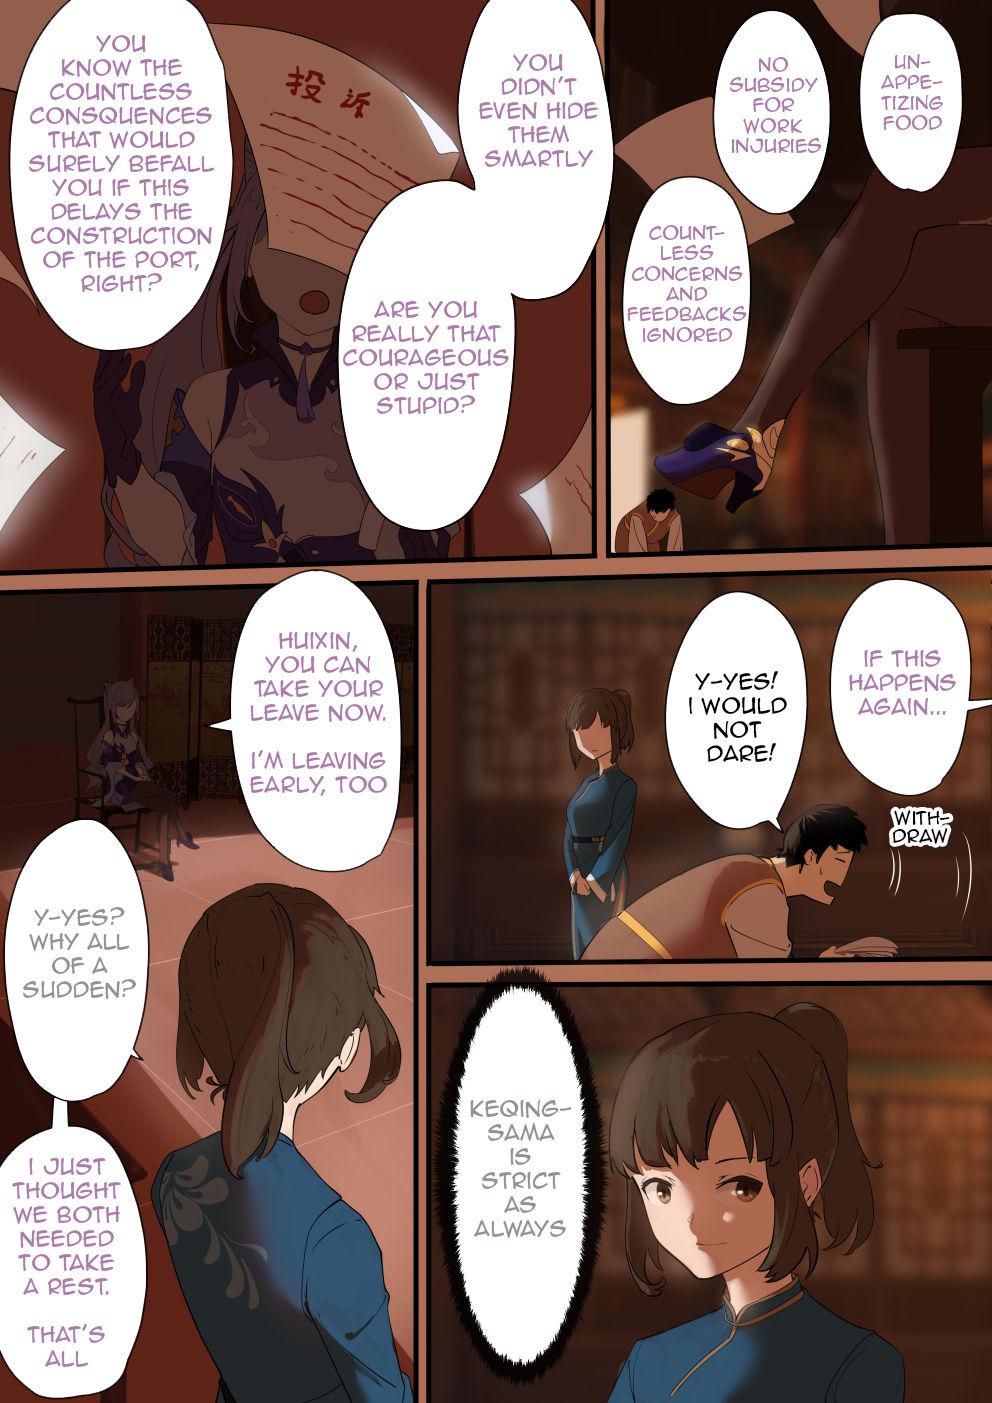 Stroking The First Archon Part 1-3 - Genshin impact Amante - Page 10